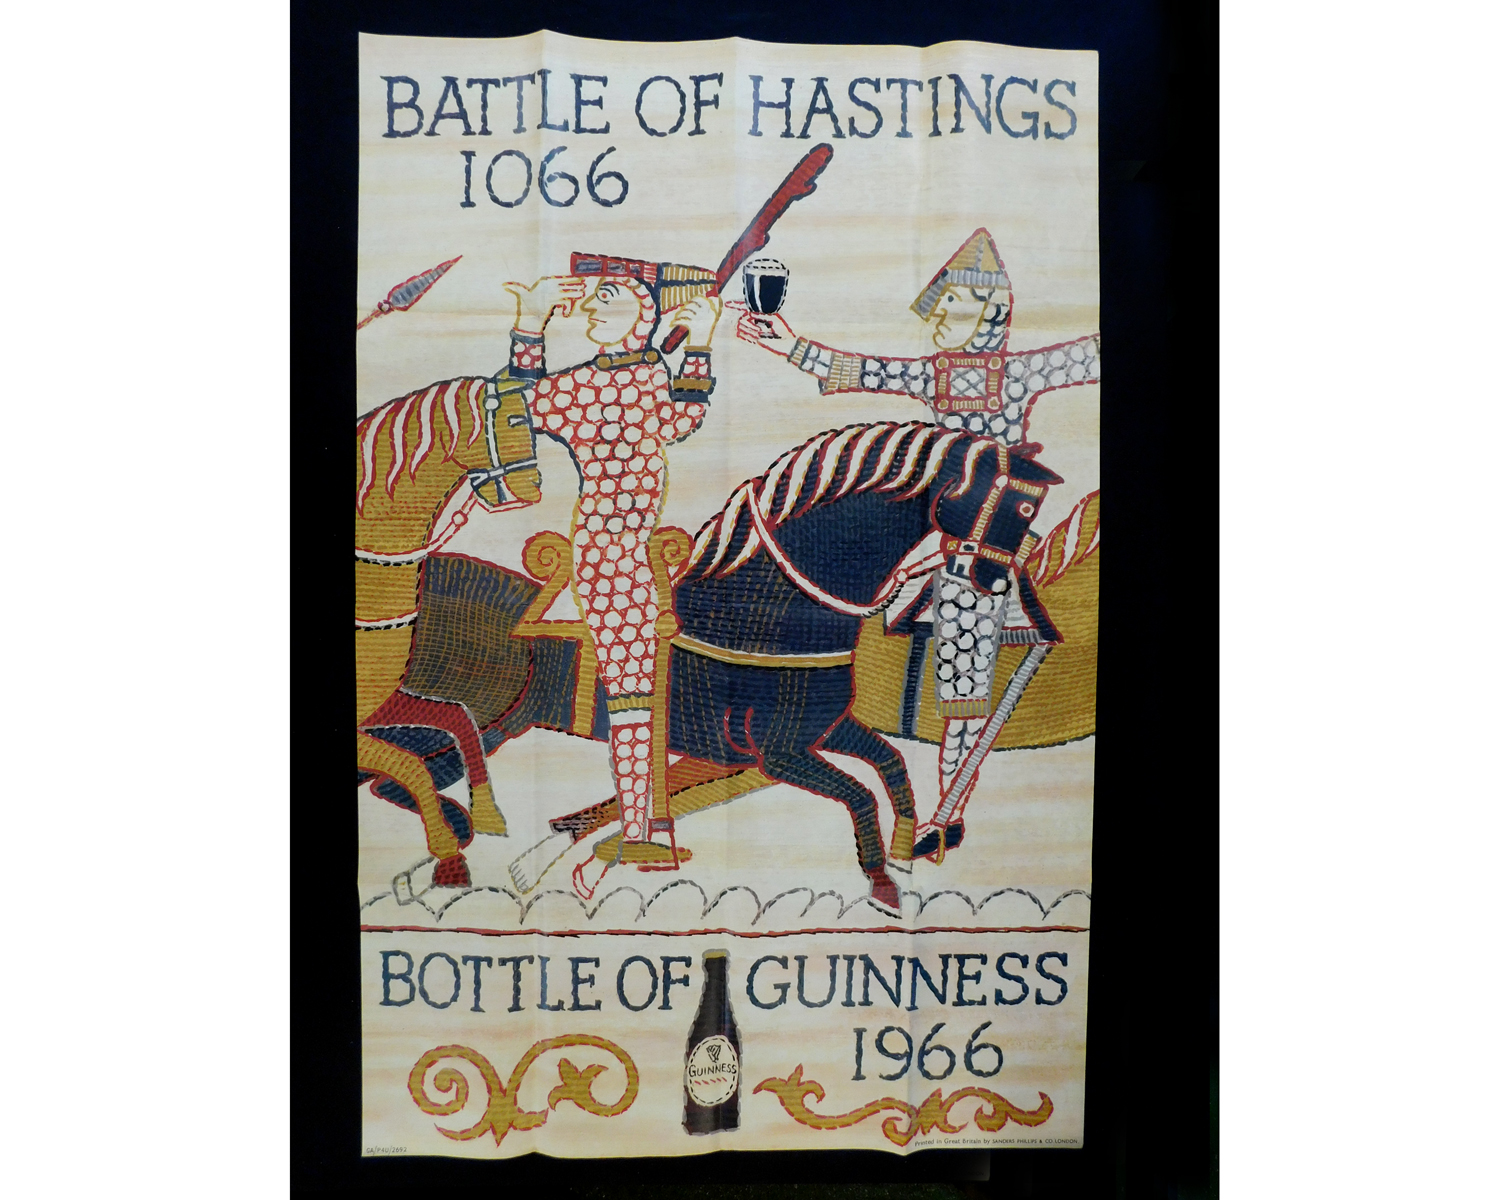 BATTLE OF HASTINGS 1066 - BOTTLE OF GUINNESS 1966, large Guinness promotional poster 1966, printed